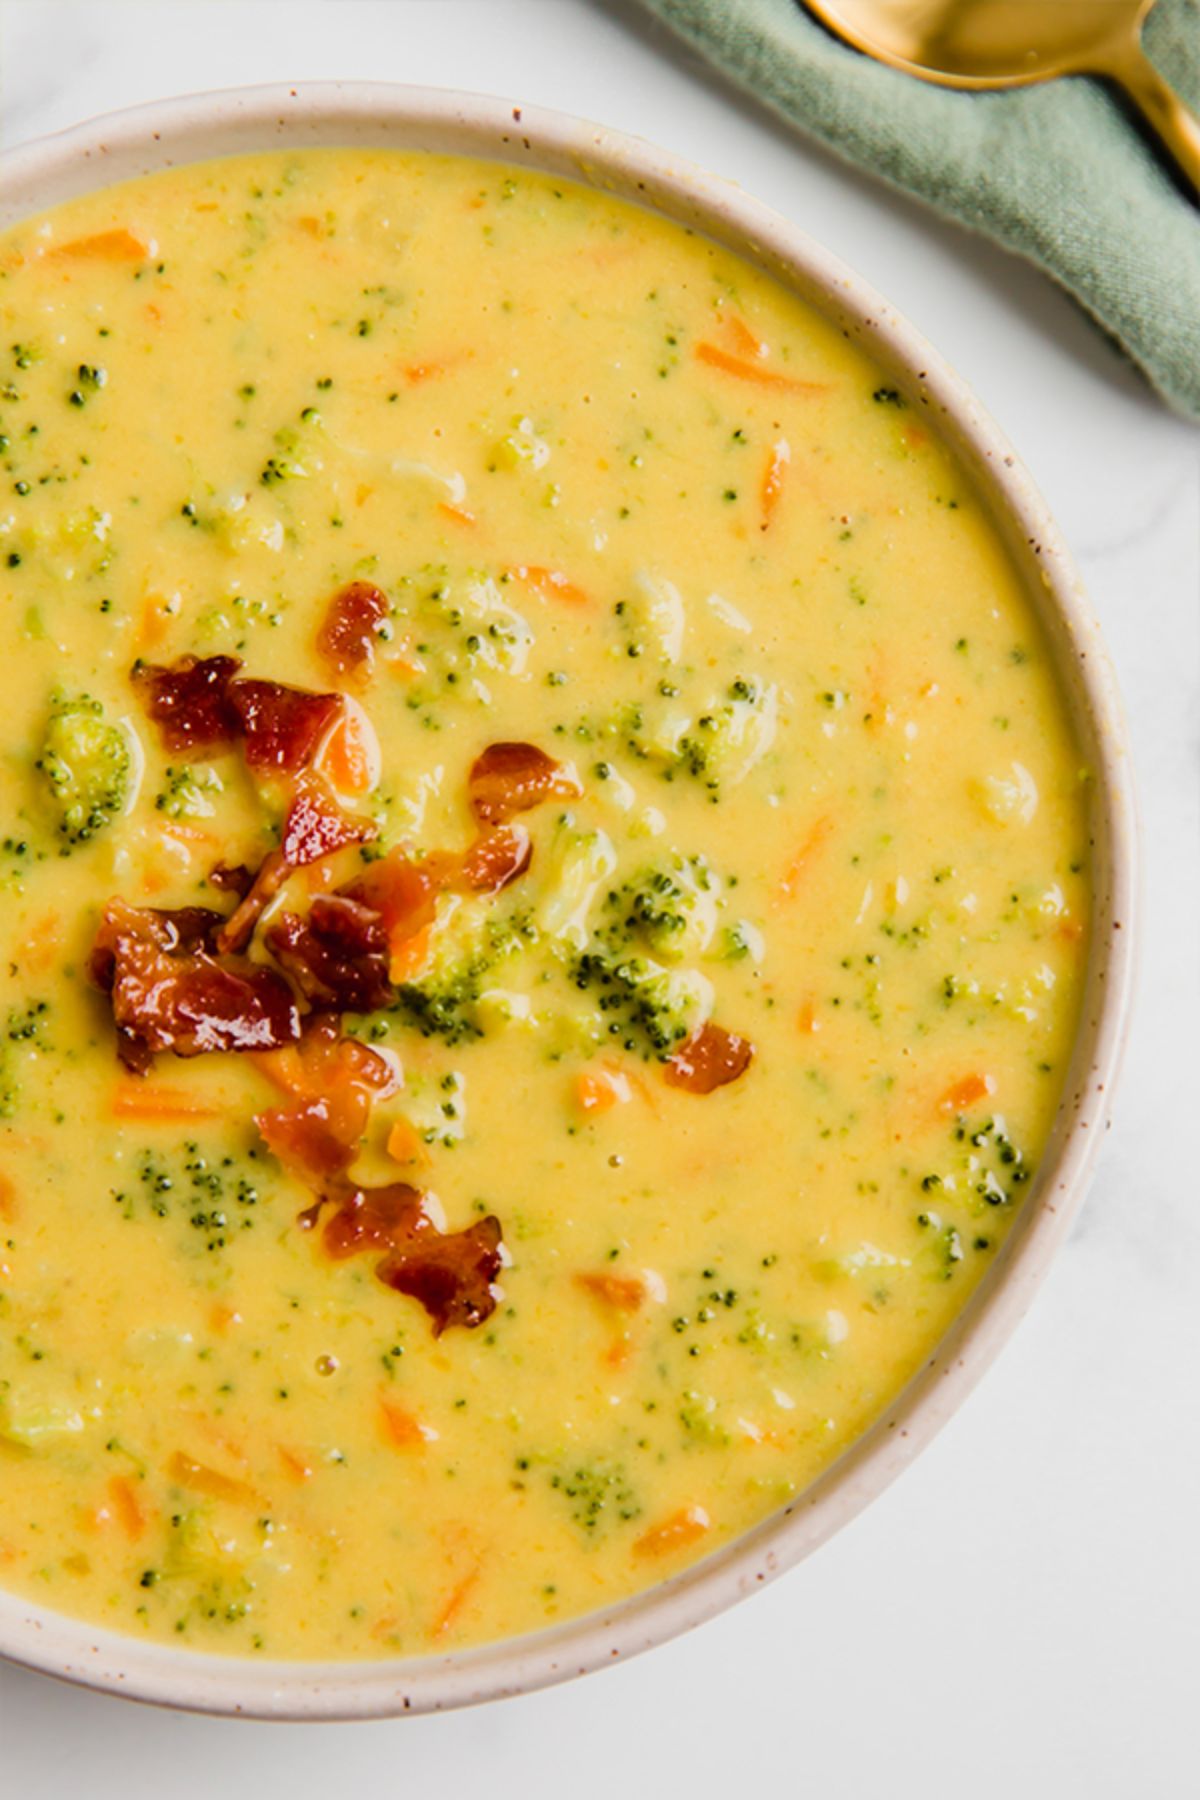 a bowl of yellow soup with broccoli florets just seen, and topped with crispy bacon bits